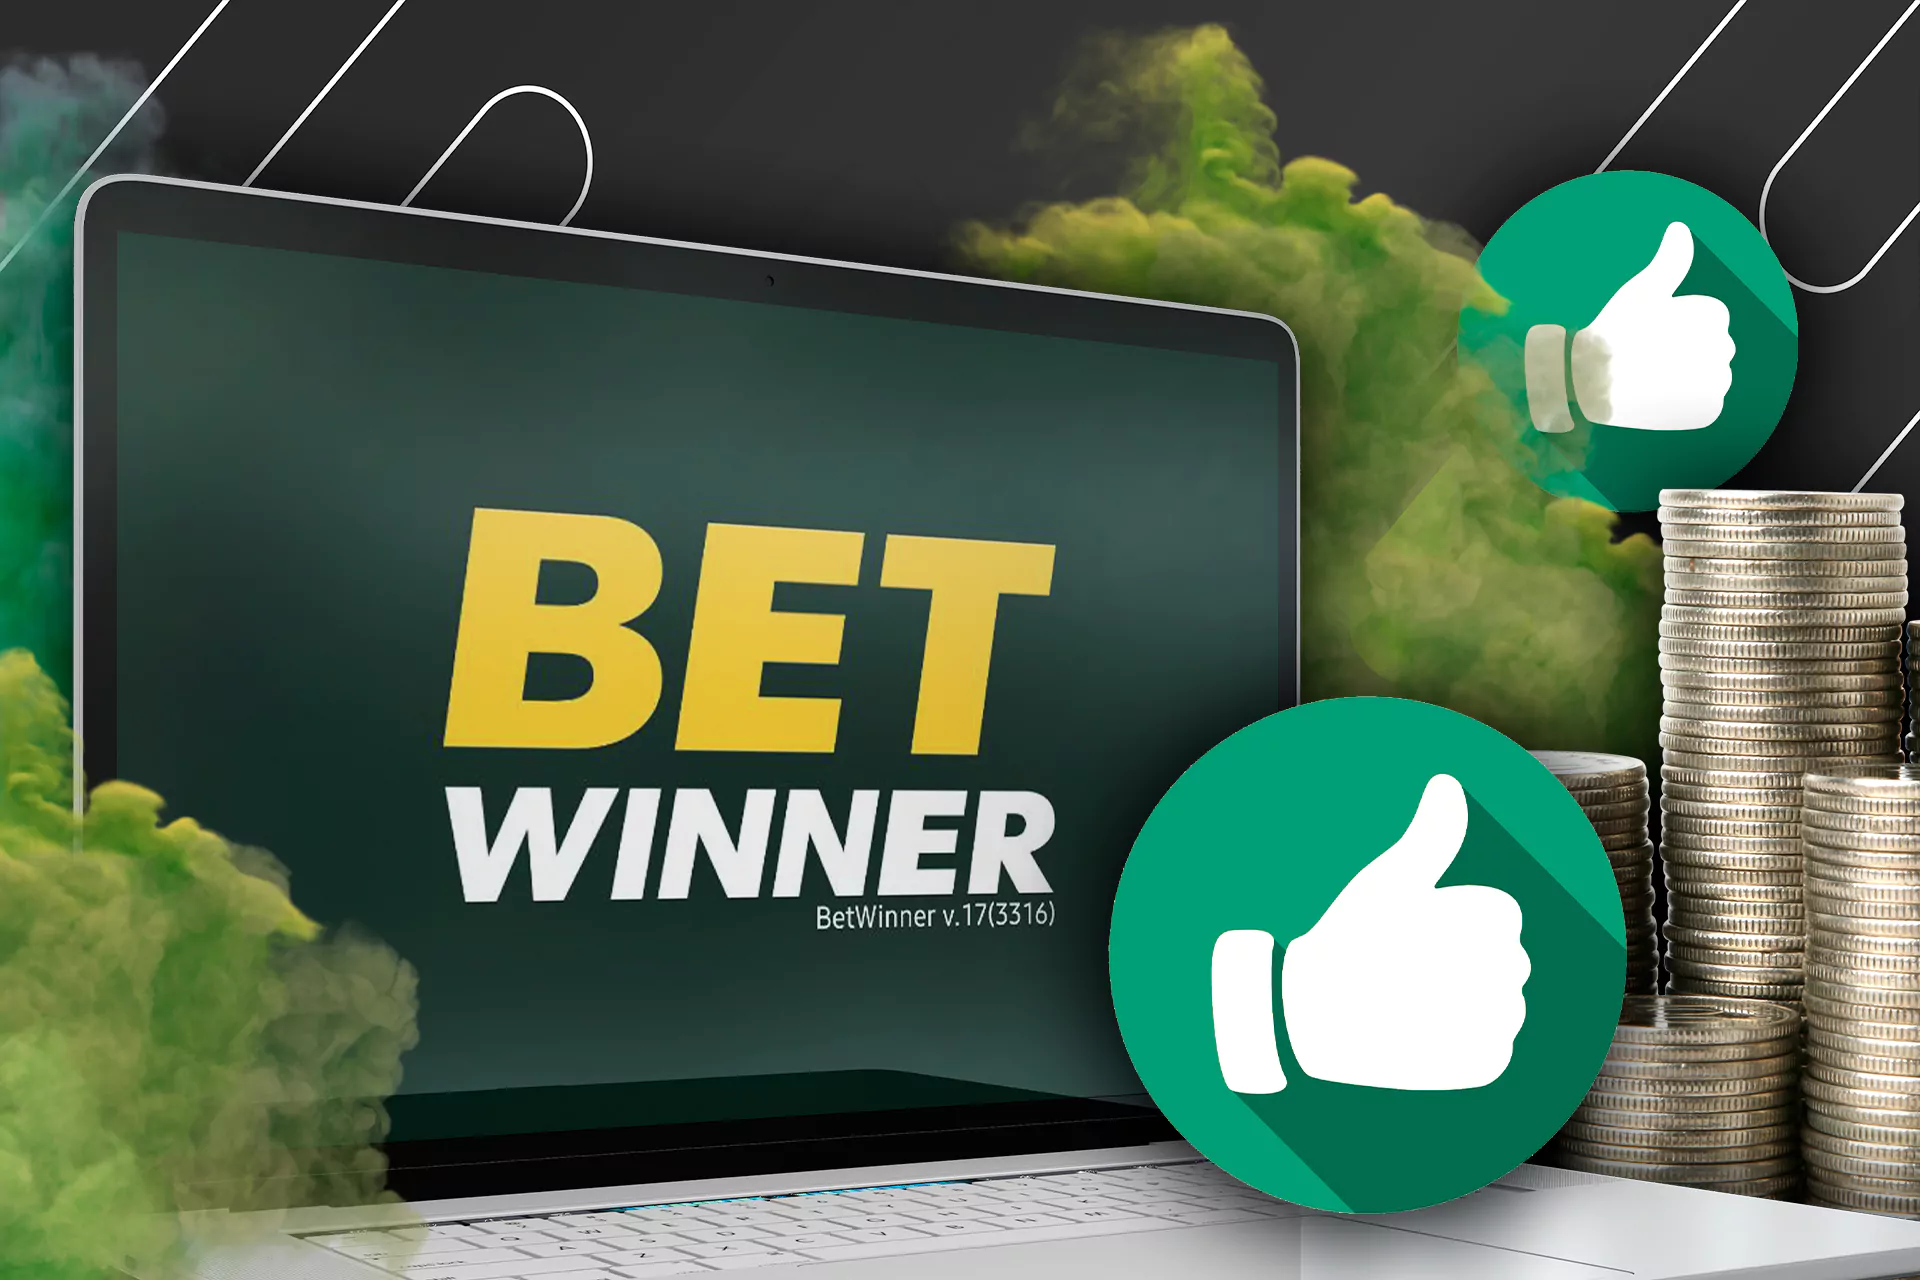 Register at Betwinner, make a deposit and place bets on sports.